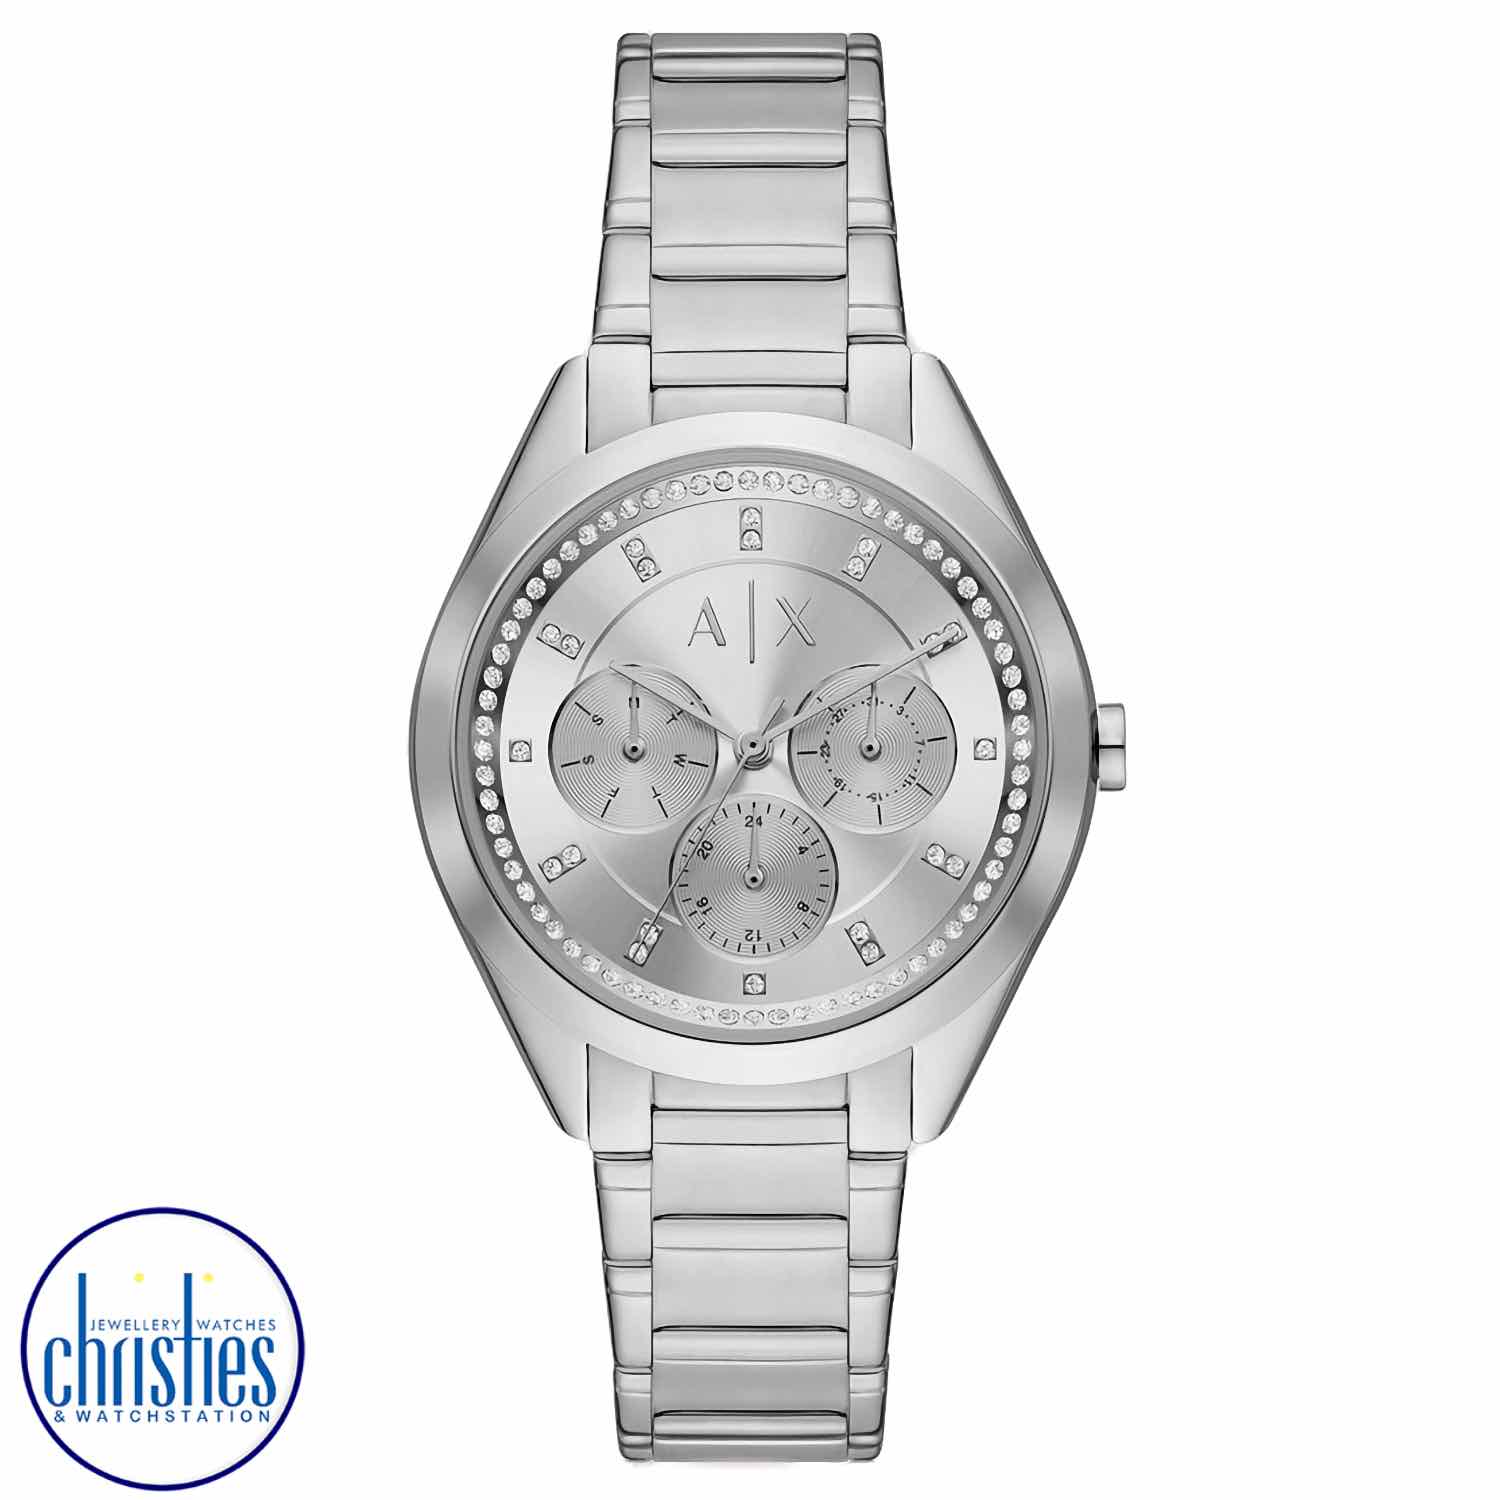 AX5654 A|X Armani Exchange LADY GIACOMO Multifunction Stainless Steel Watch. AX5654 A|X Armani Exchange Multifunction Stainless Steel WatchAfterpay - Split your purchase into 4 instalments - Pay for your purchase over 4 instalments, due every two weeks.